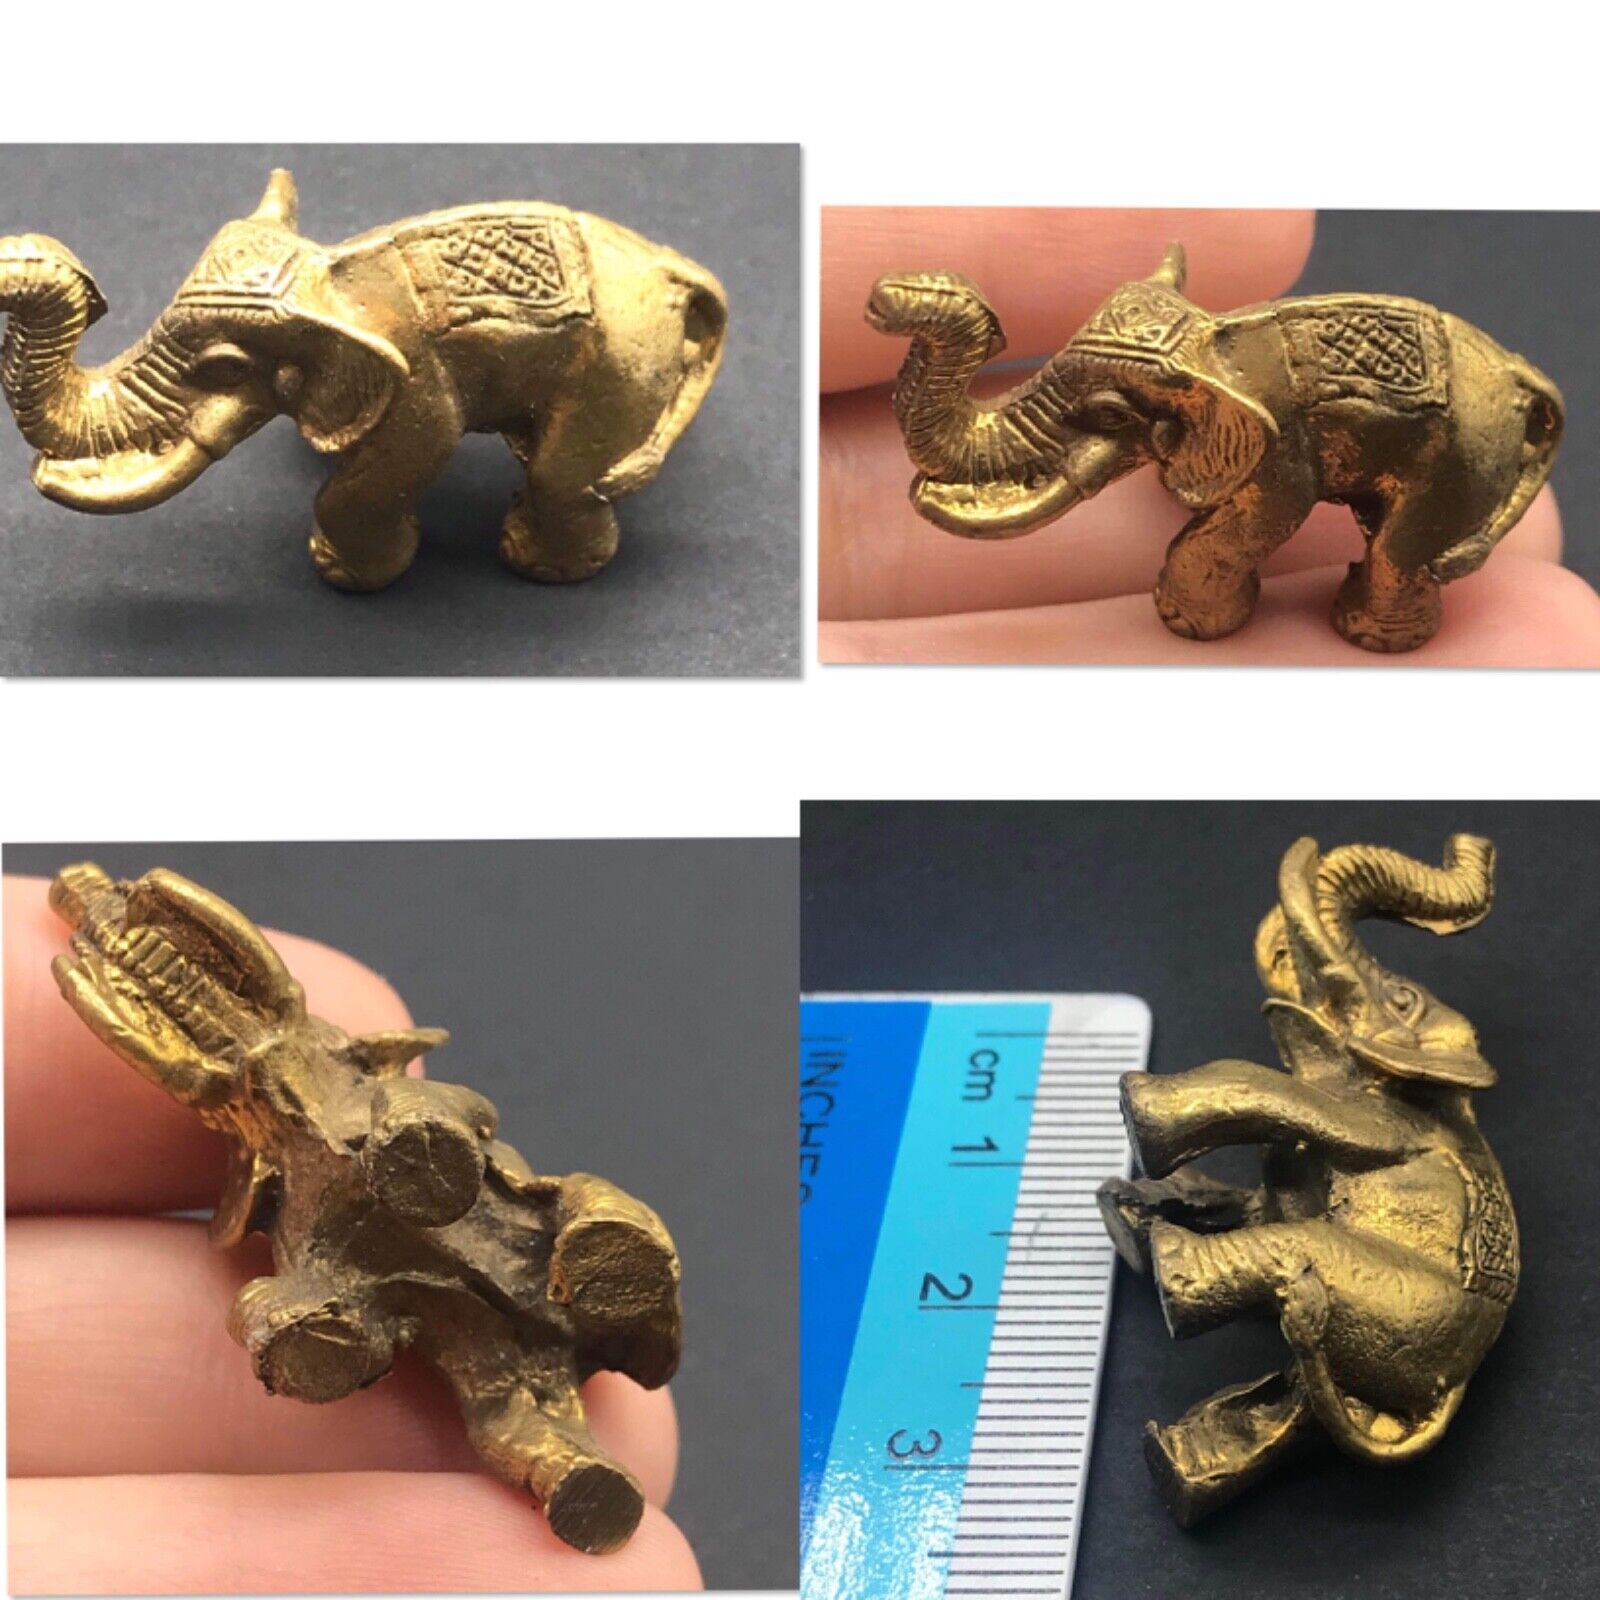 South Asian Antiques Rare Beautiful Old Vintage Small Elephant Statue Amulet